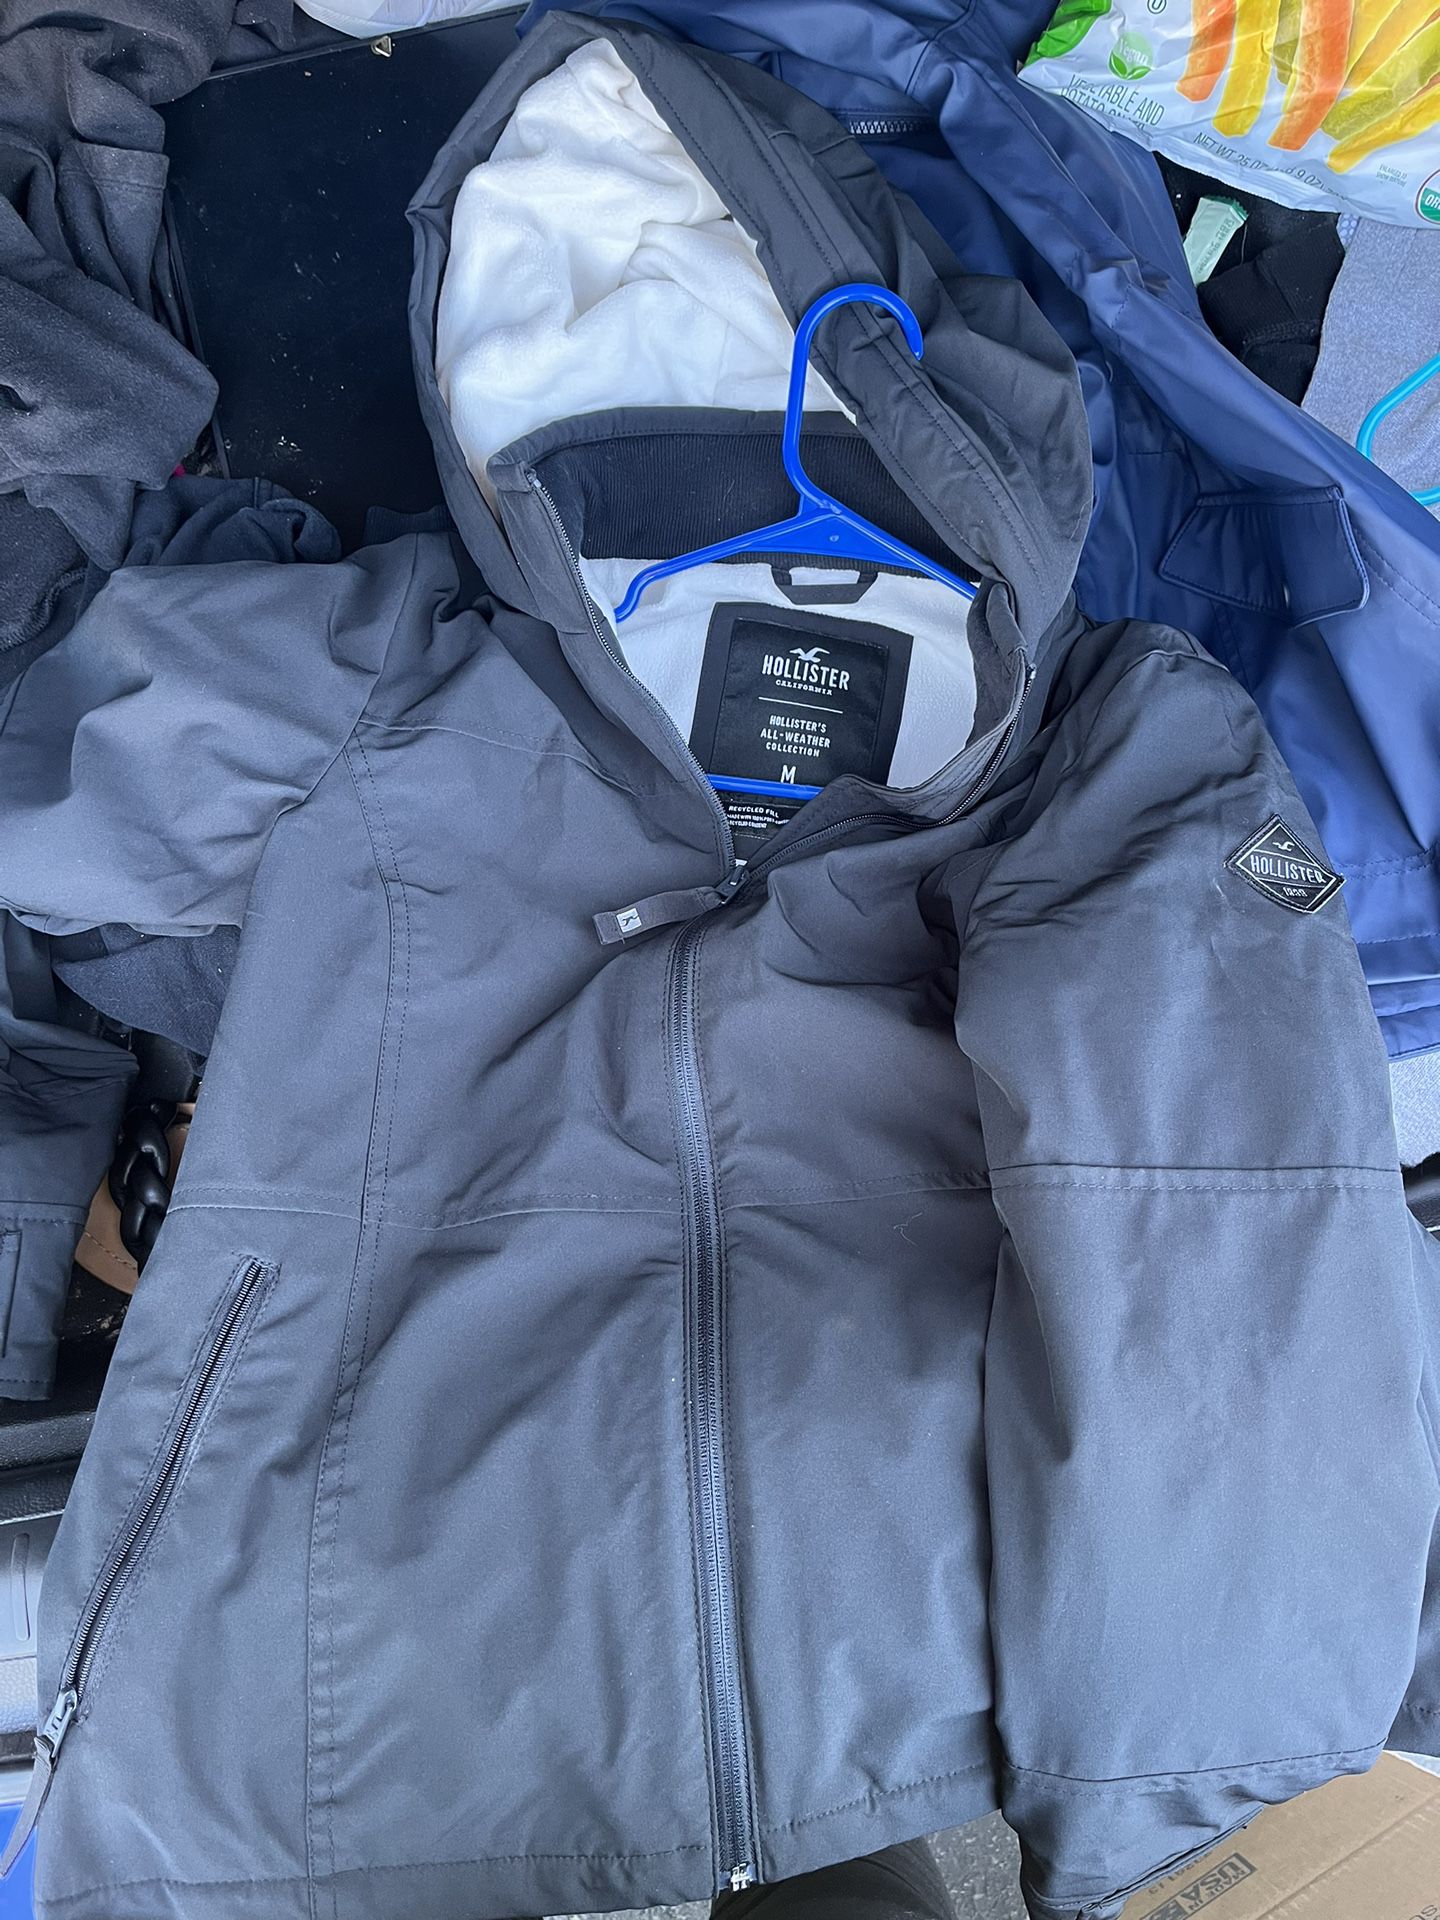 Hollister Jacket for Sale in Modesto, CA - OfferUp